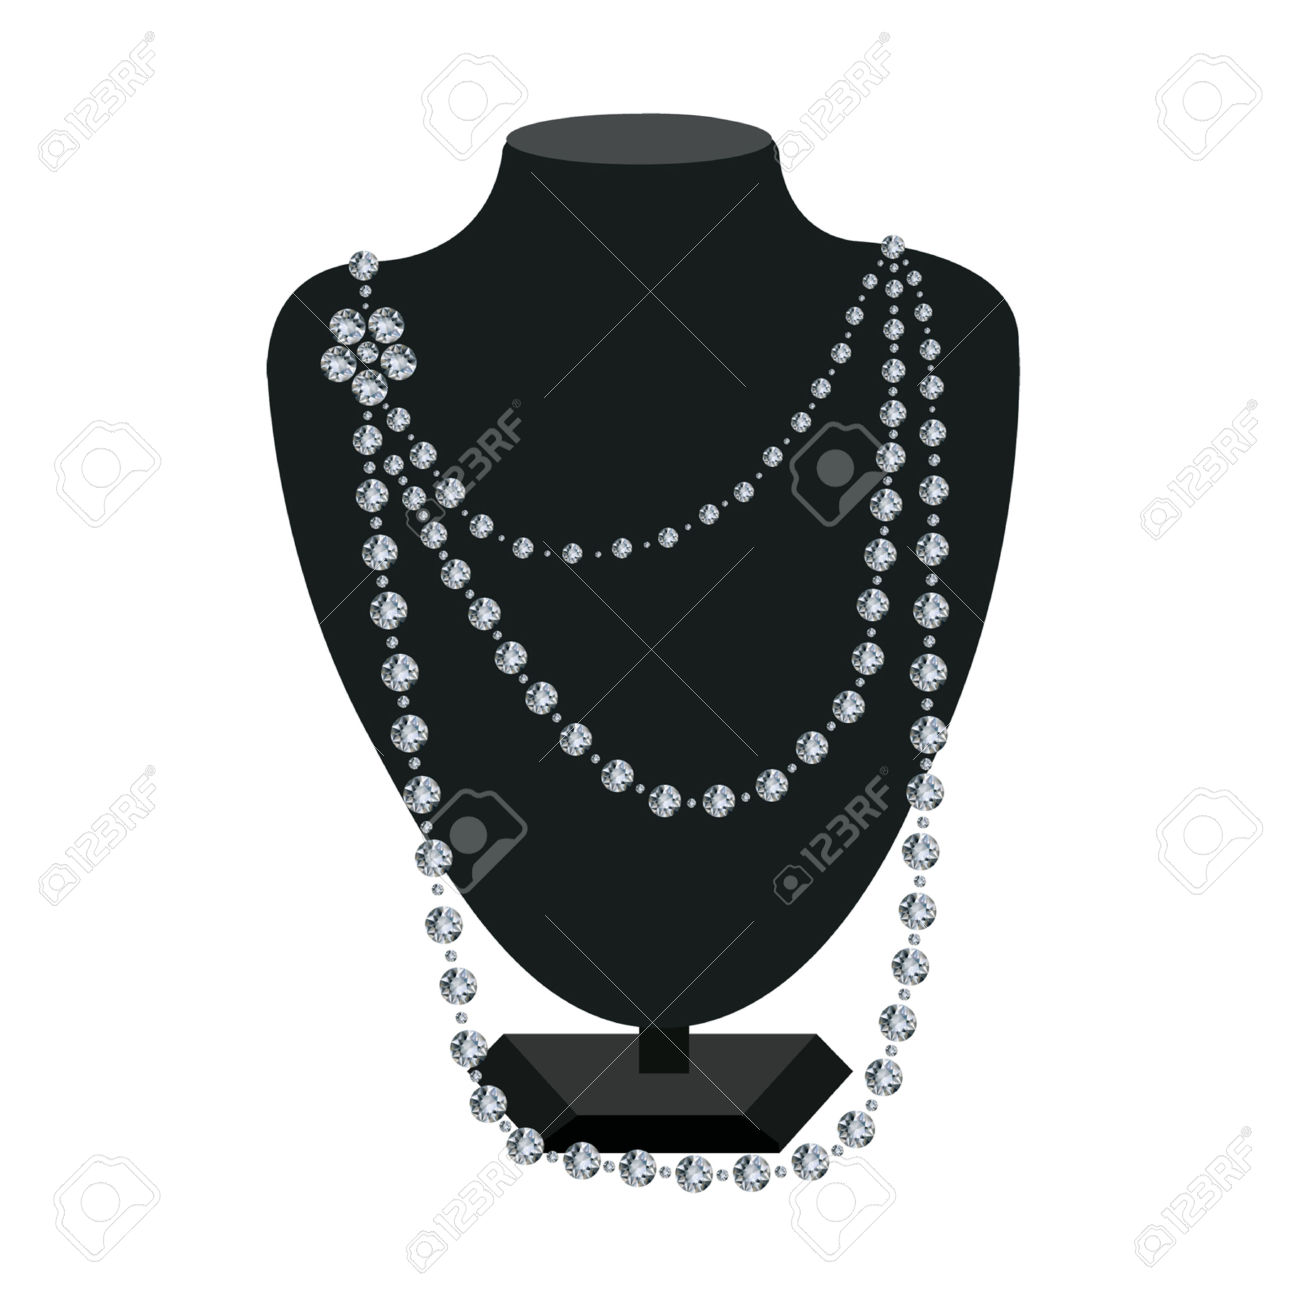 jewelry clipart images - photo #9